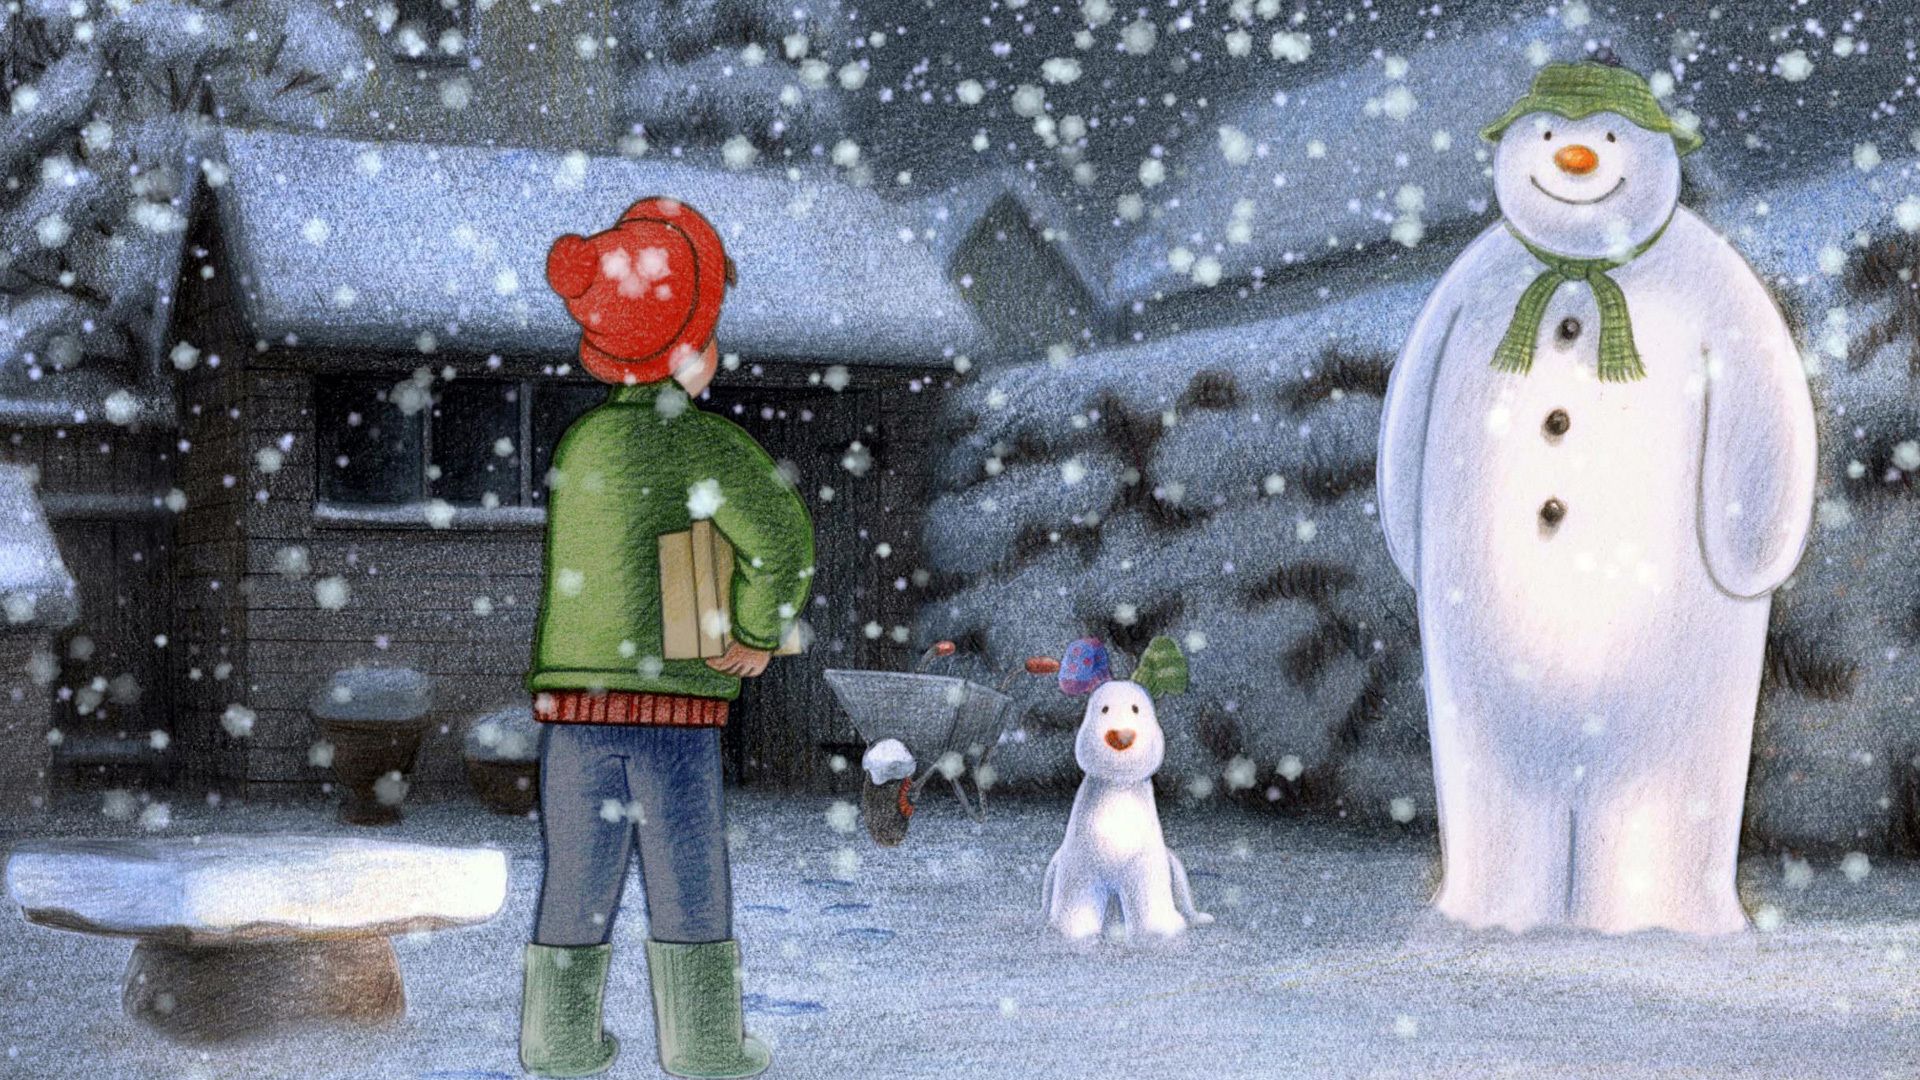 The Snowman and the Snowdog background